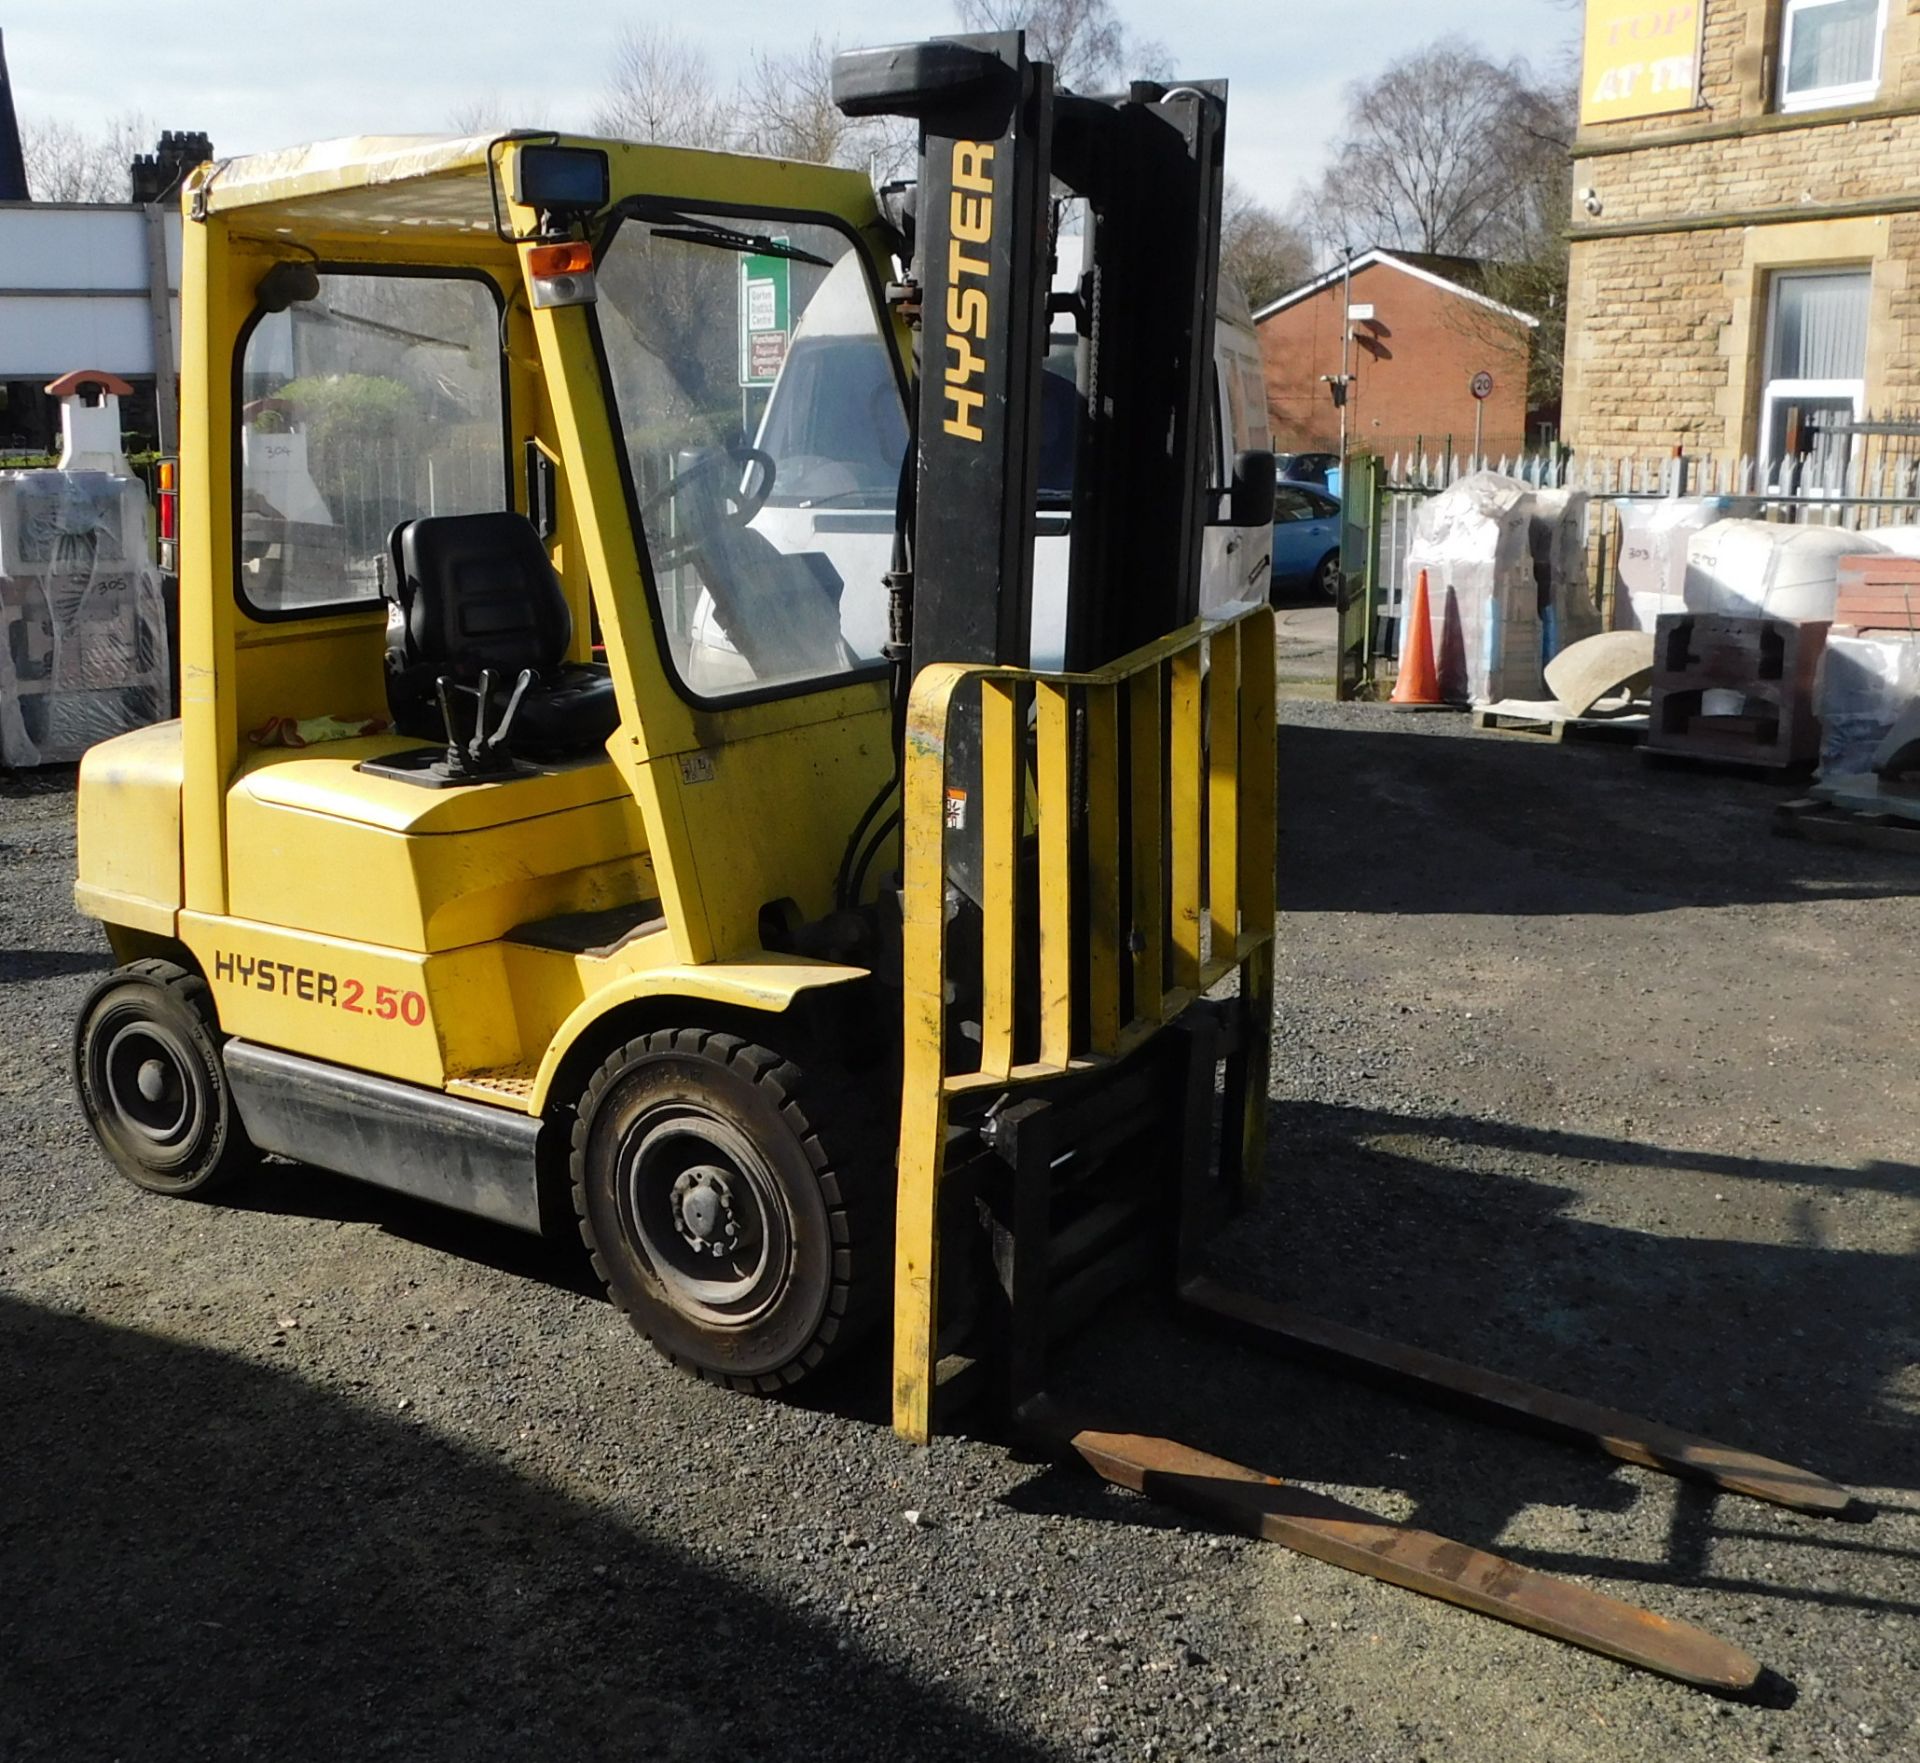 Hyster H2.50XM Diesel Forklift, H177B32597Z (2002), Capacity 2.5t (Collection Thursday 23rd May – - Image 4 of 7